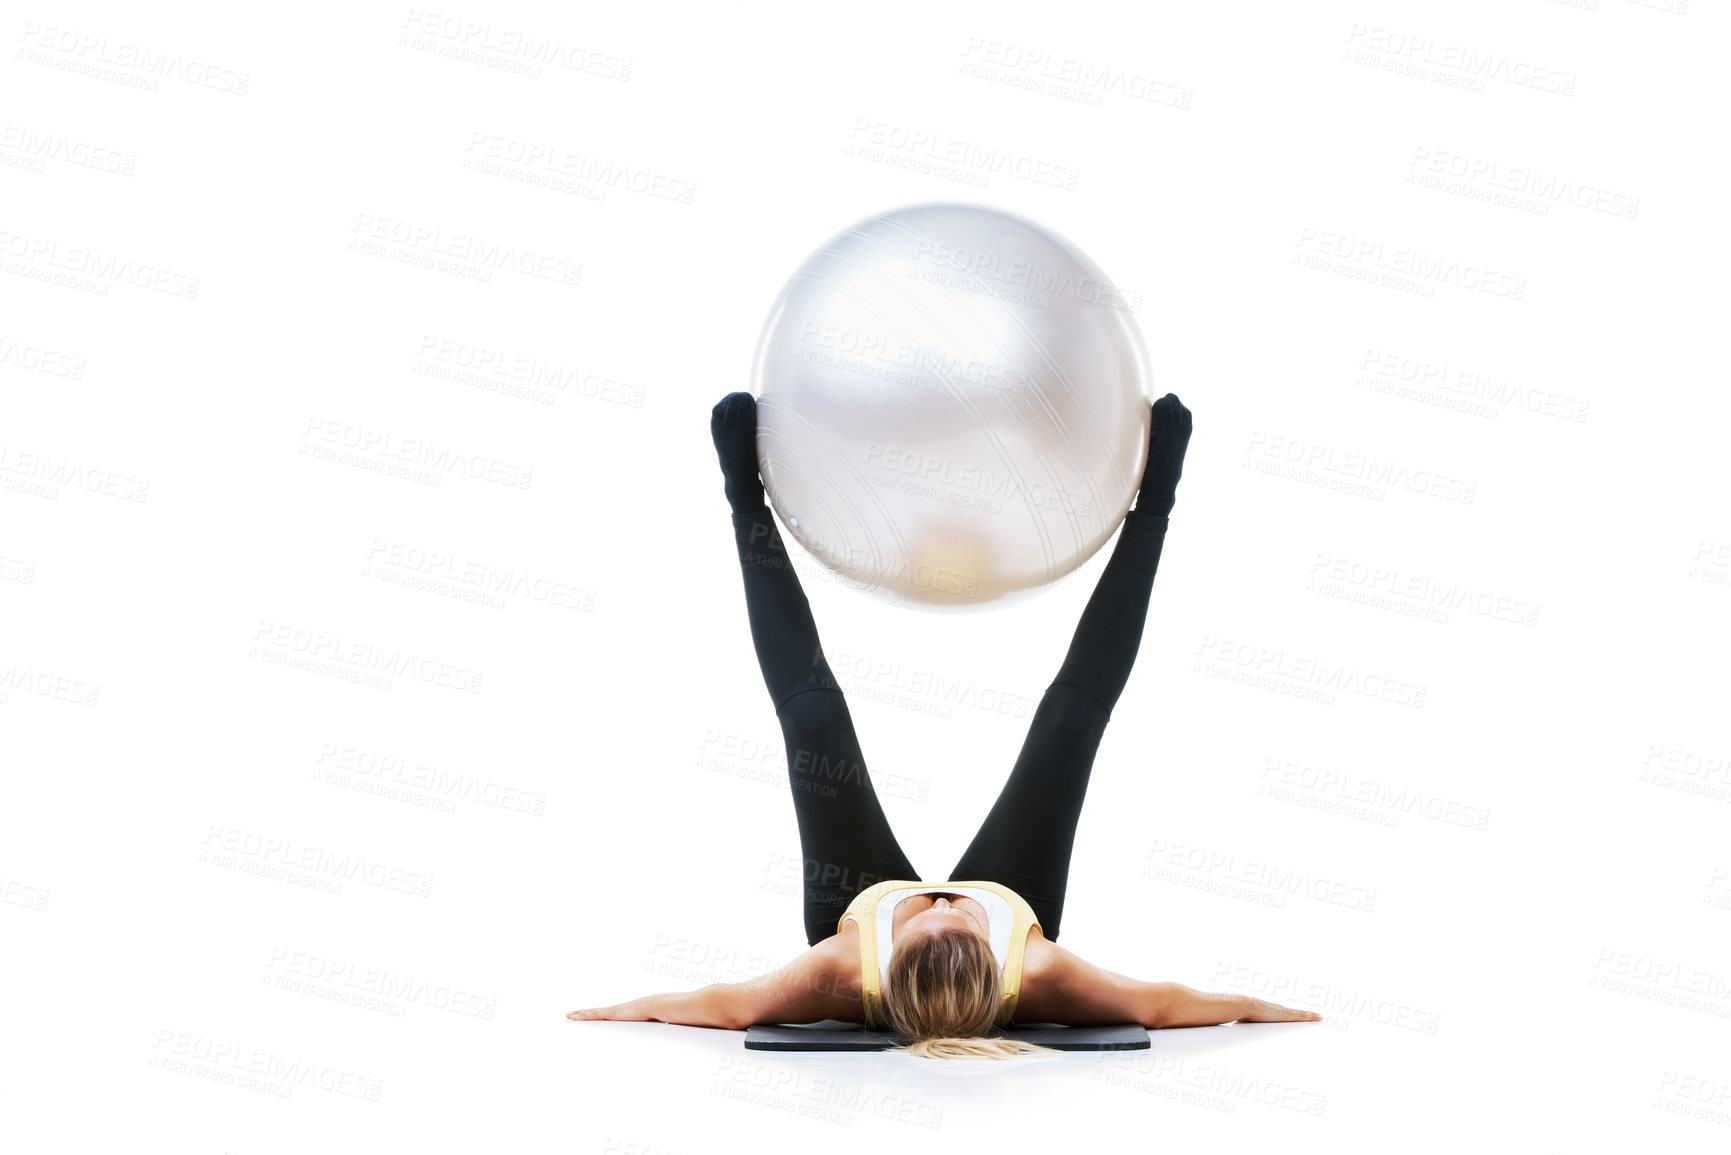 Buy stock photo Shot of a female holding an exercise ball up with her legs